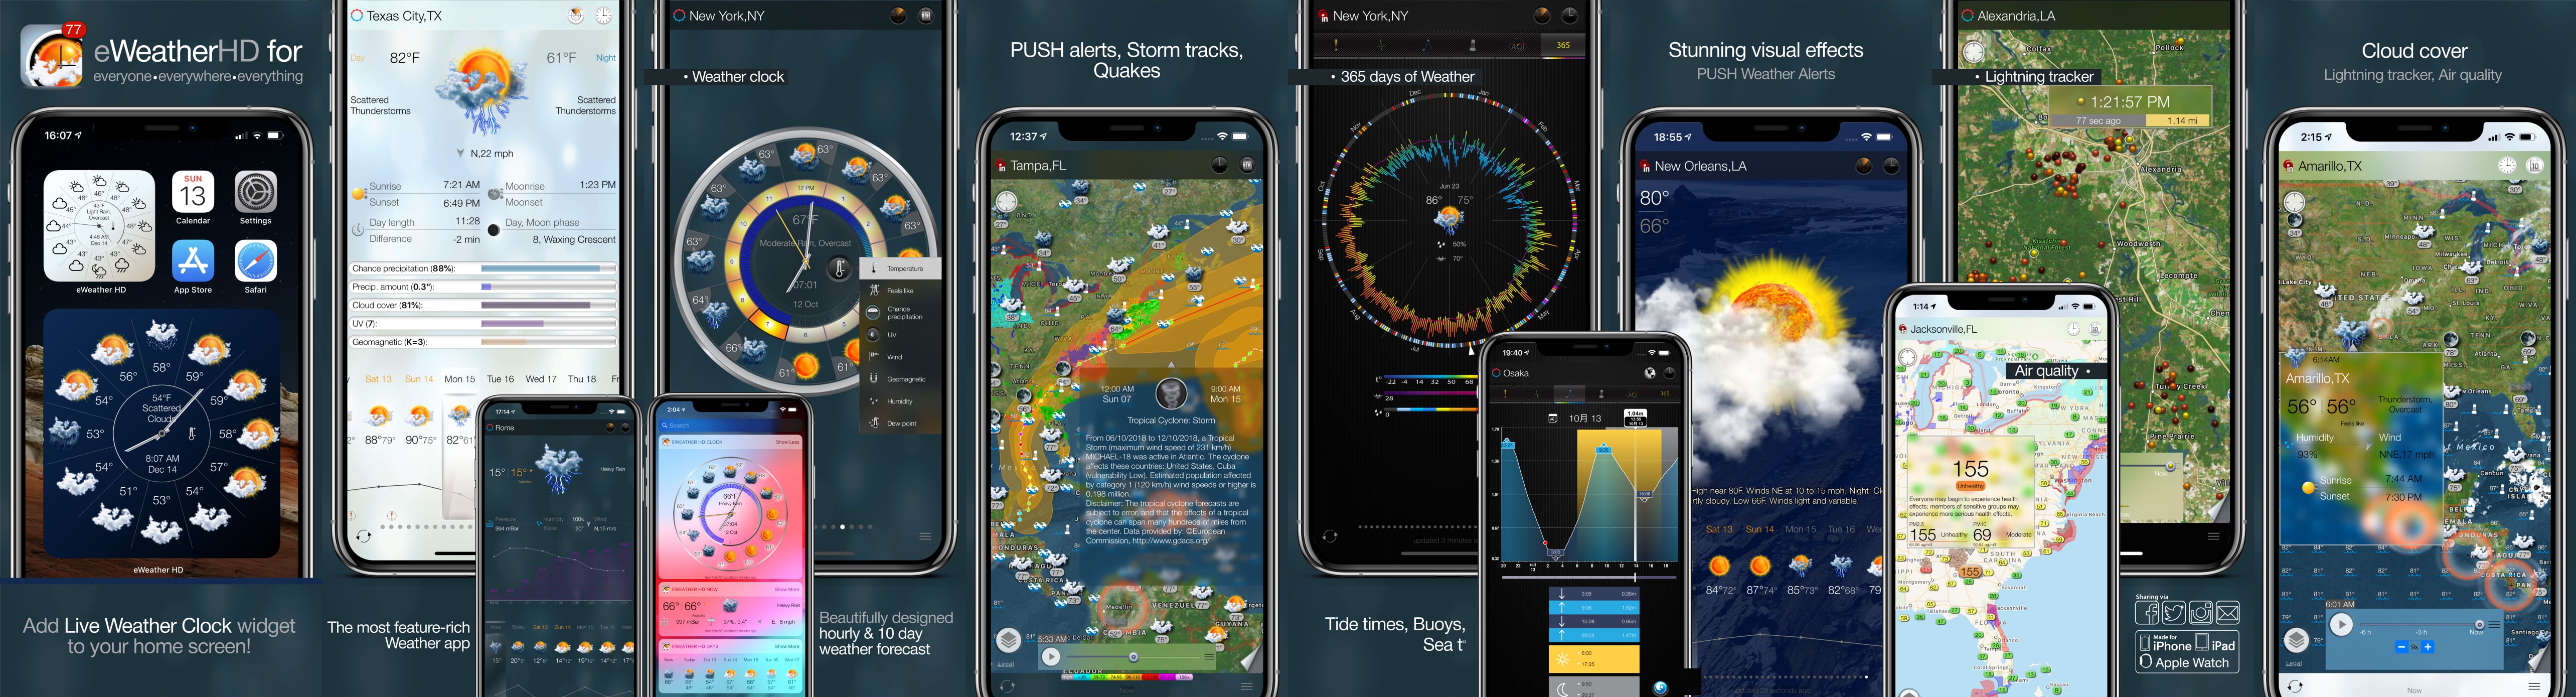 eWeather HD 3.13 for  Apple Watch- Severe weather alerts PUSH notifications, weather forecast, wind, rain, snow, temperature of air, humidity, dew-point, uv-index, geomagnetic activity and more